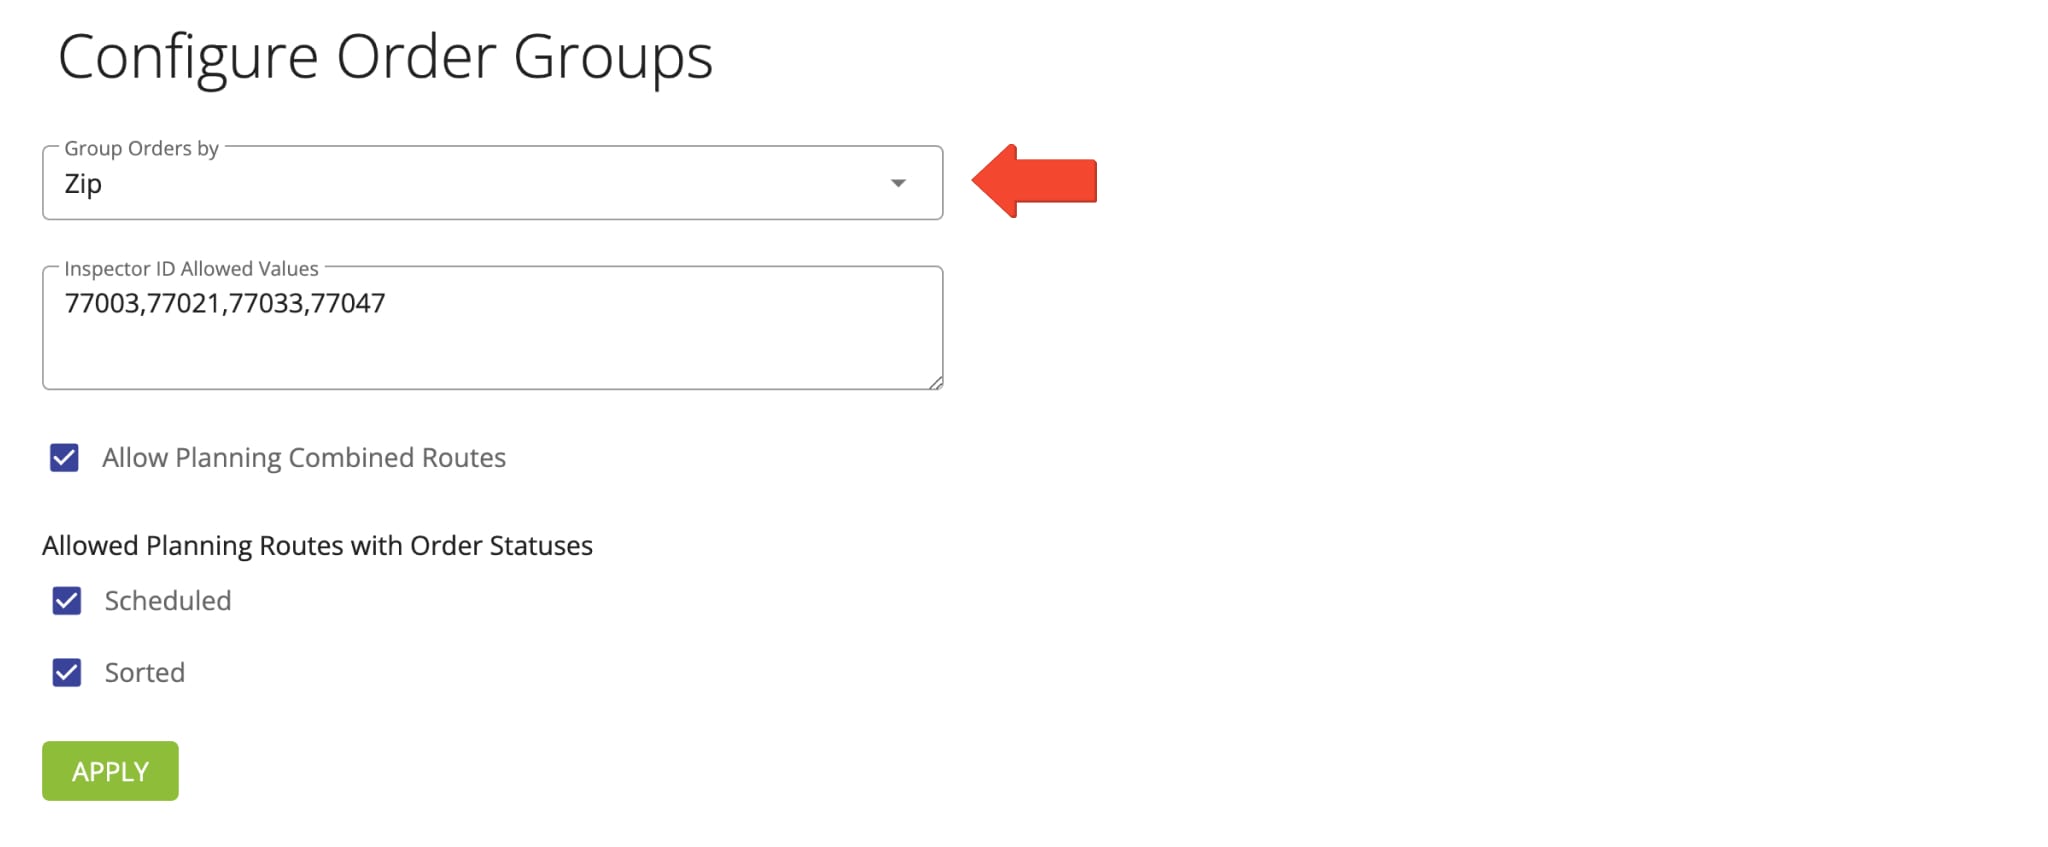 Group orders by ZIP code to create custom Order Groups for repeat route planning and optimization.